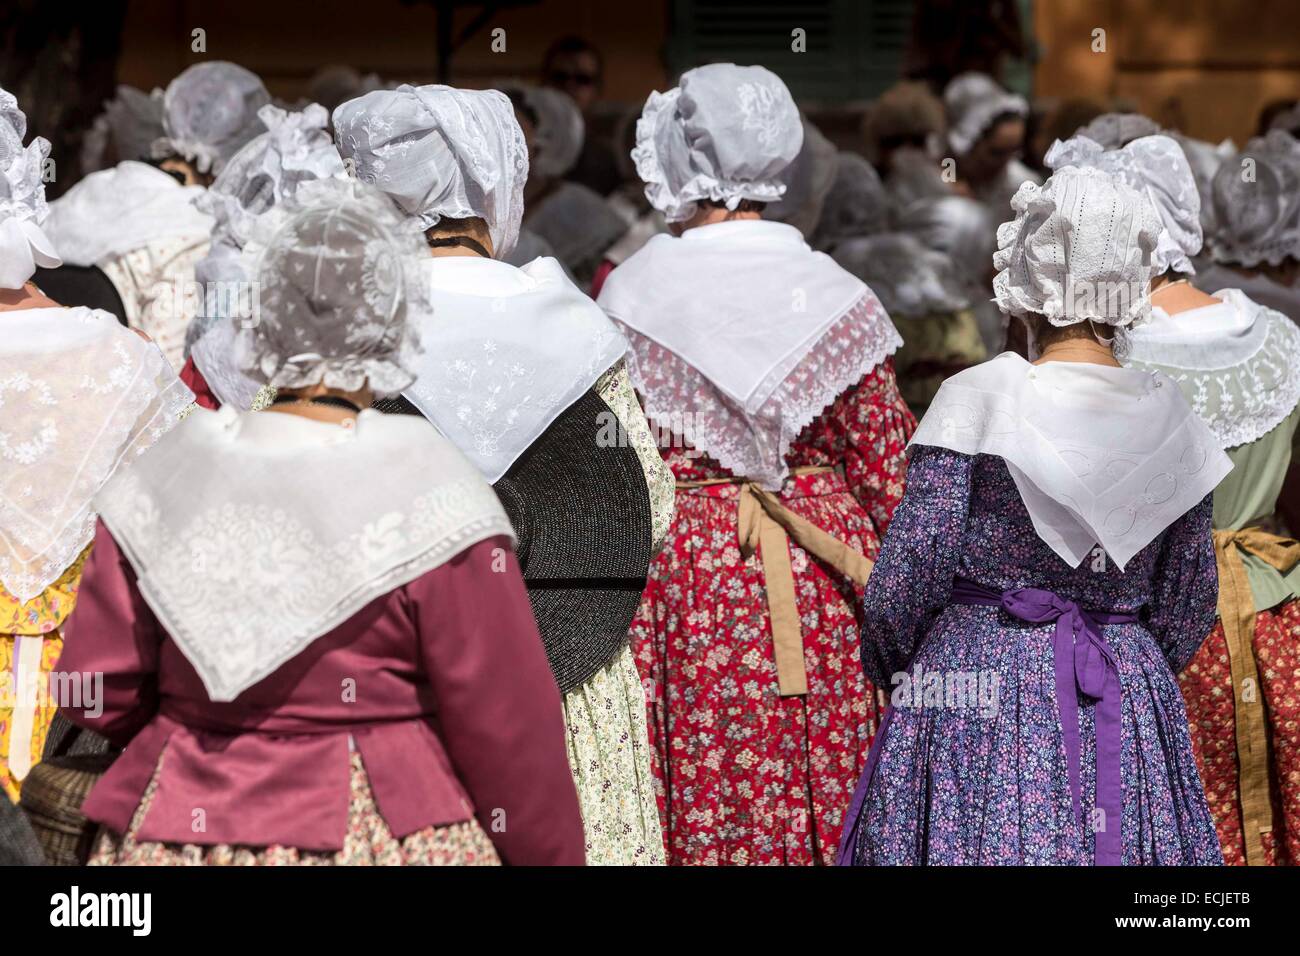 France, Var, Frejus, La Bravade, traditional festival in honor of the arrival of Saint Francois de Paule in the city, traditional Provencal Costume Stock Photo